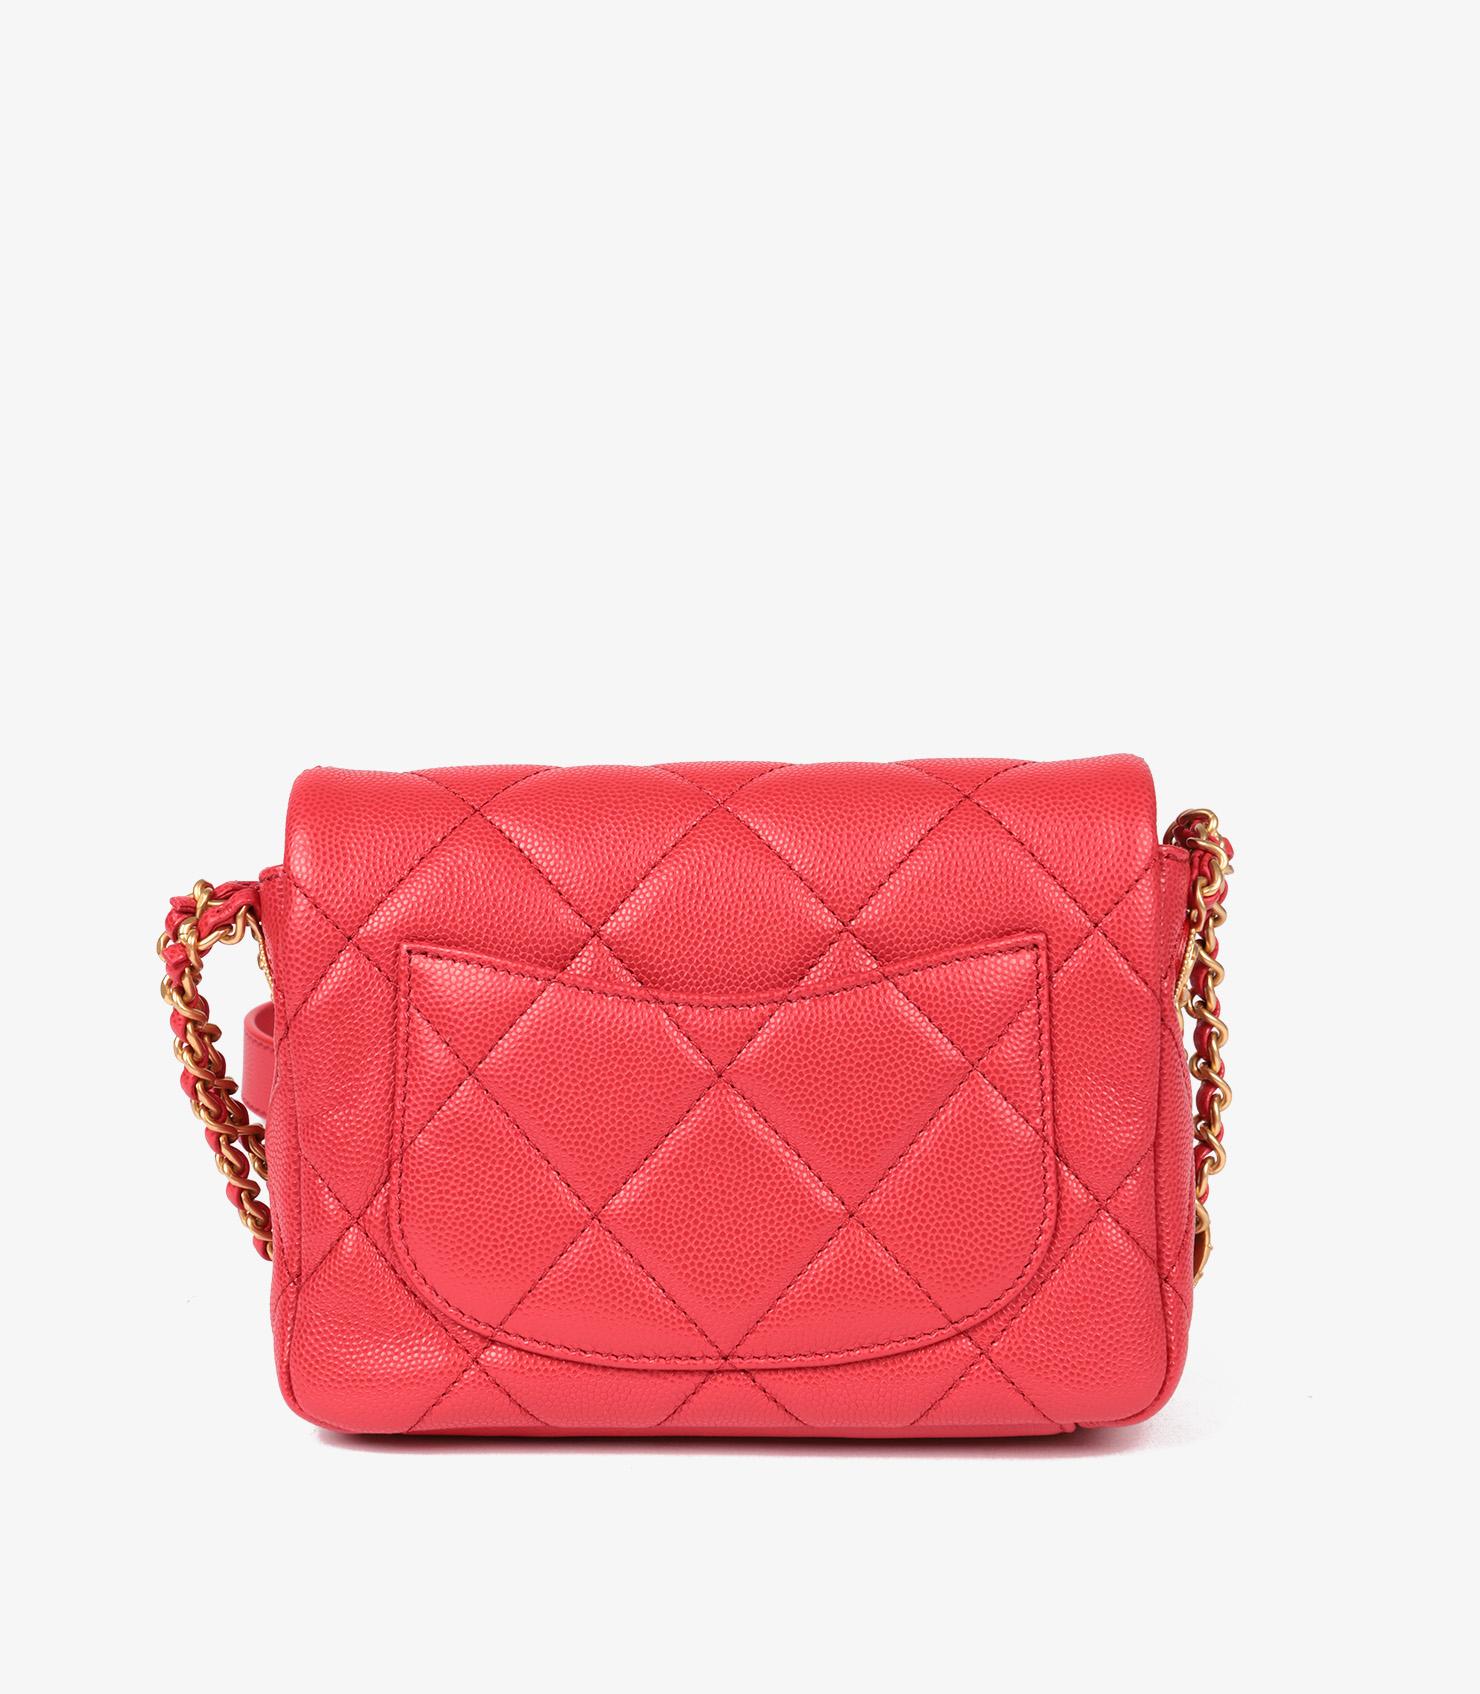 Chanel Red Quilted Shiny Caviar Leather Medallion Square Mini Flap Bag For Sale 2